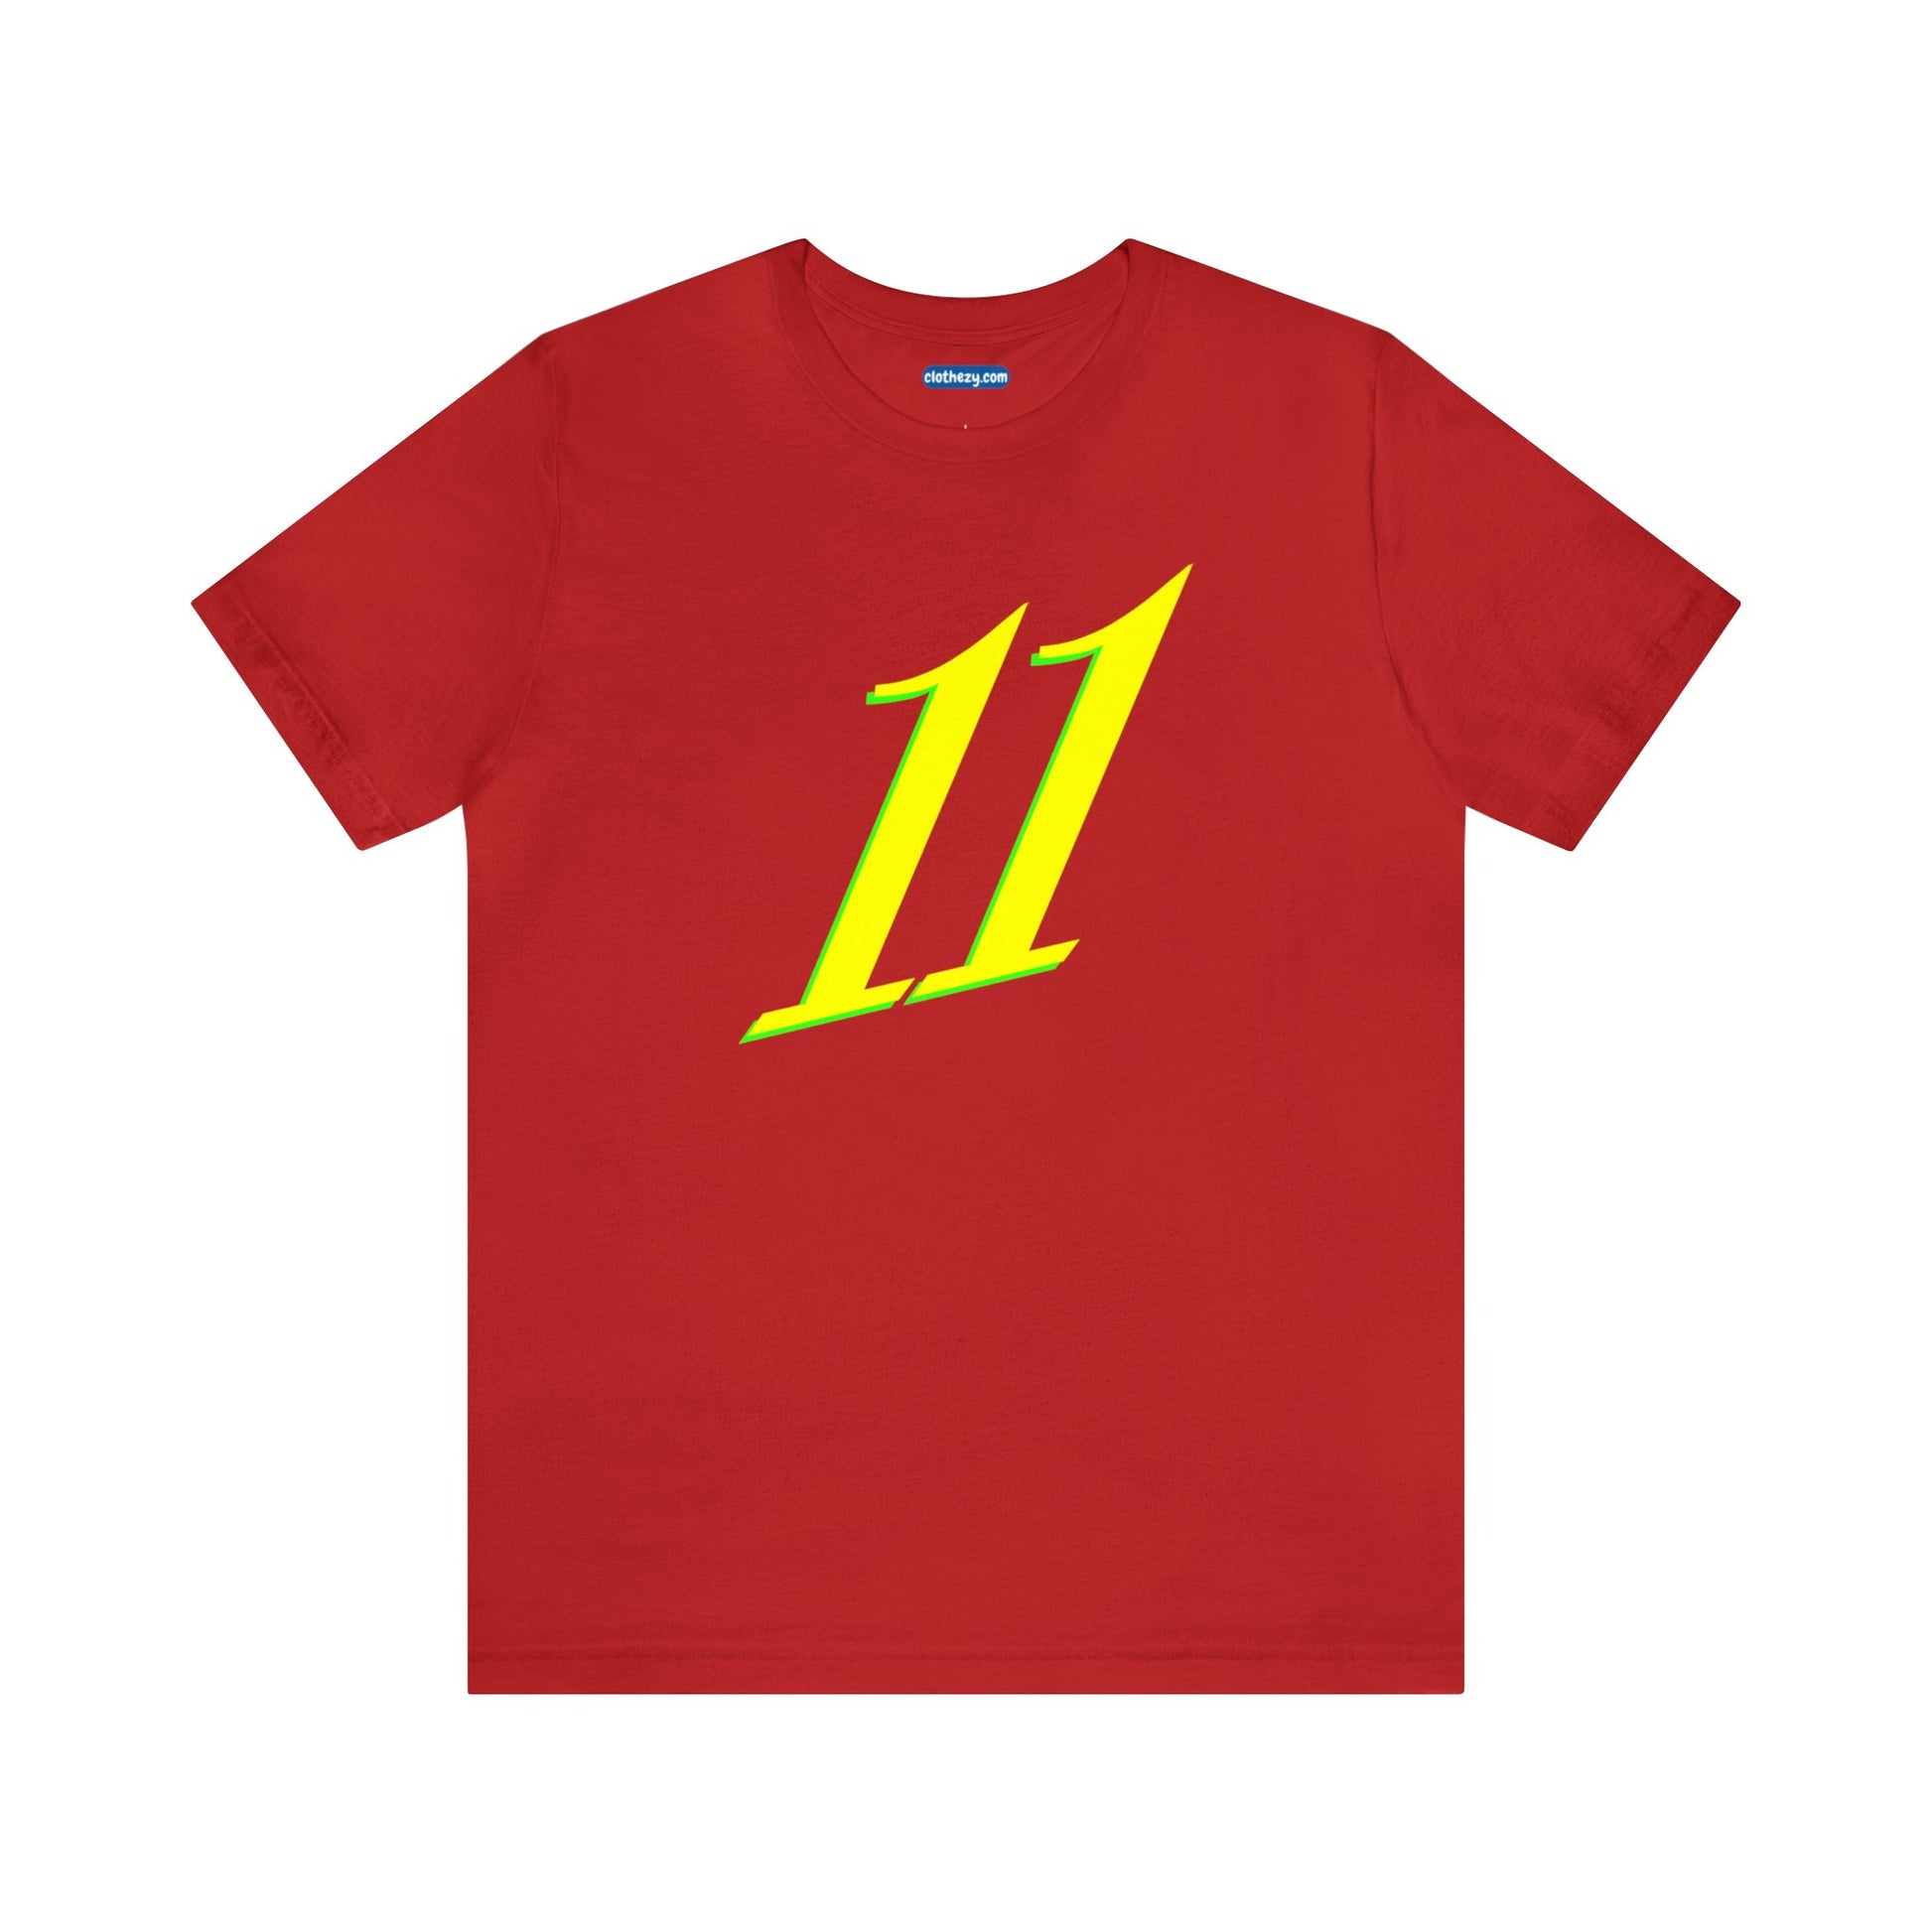 Number 11 Design - Soft Cotton Tee for birthdays and celebrations, Gift for friends and family, Multiple Options by clothezy.com in Red Size Small - Buy Now